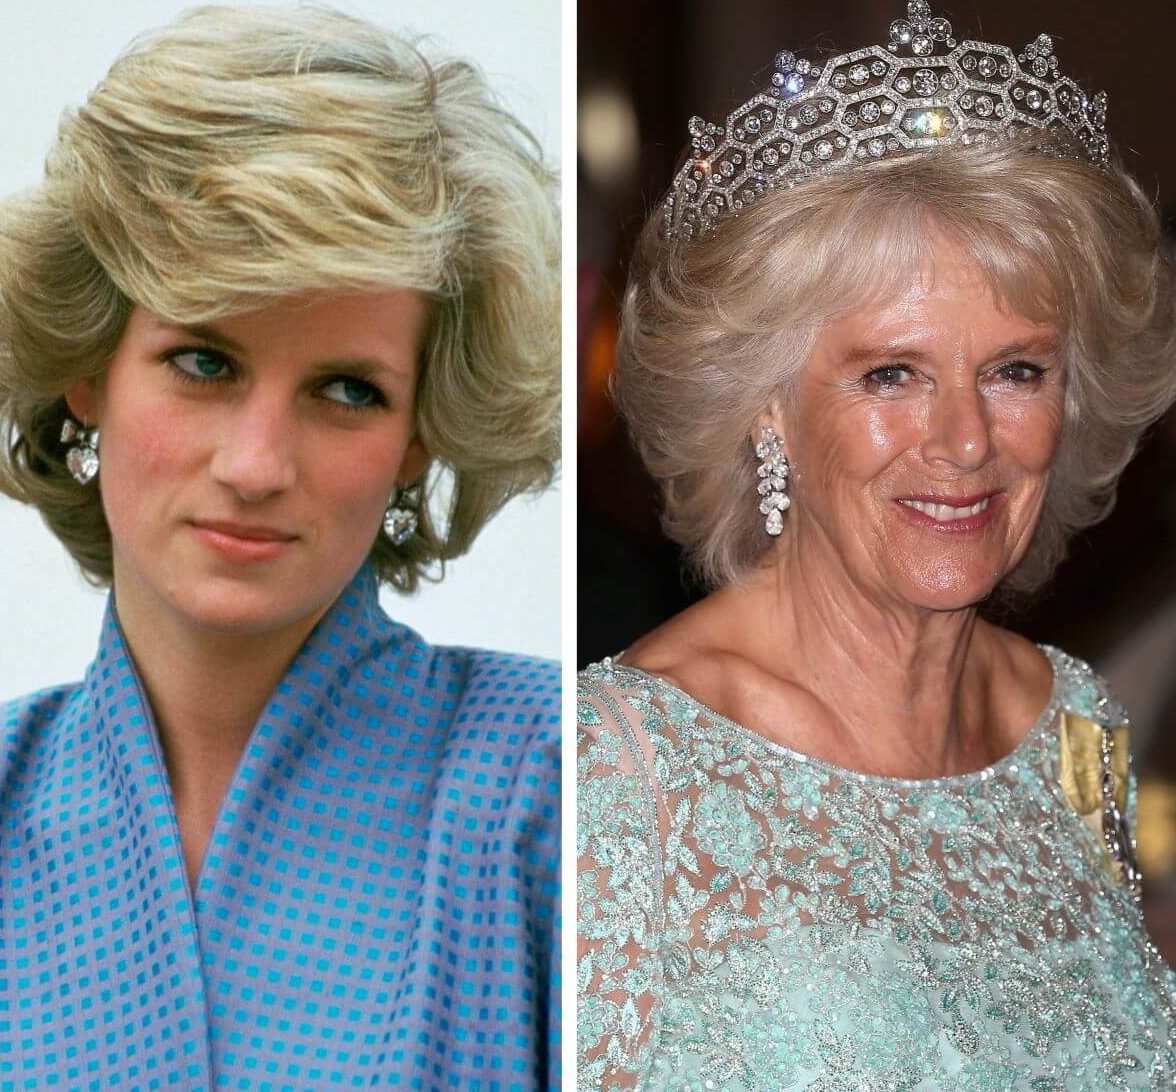 (L): Princess Diana, who once wore a blue dress to make Camilla Parker Bowles go insane, during royal visit to Italy, (R): Queen Camilla (formerly Camilla Parker Bowles) during the Commonwealth Heads of Government ceremony